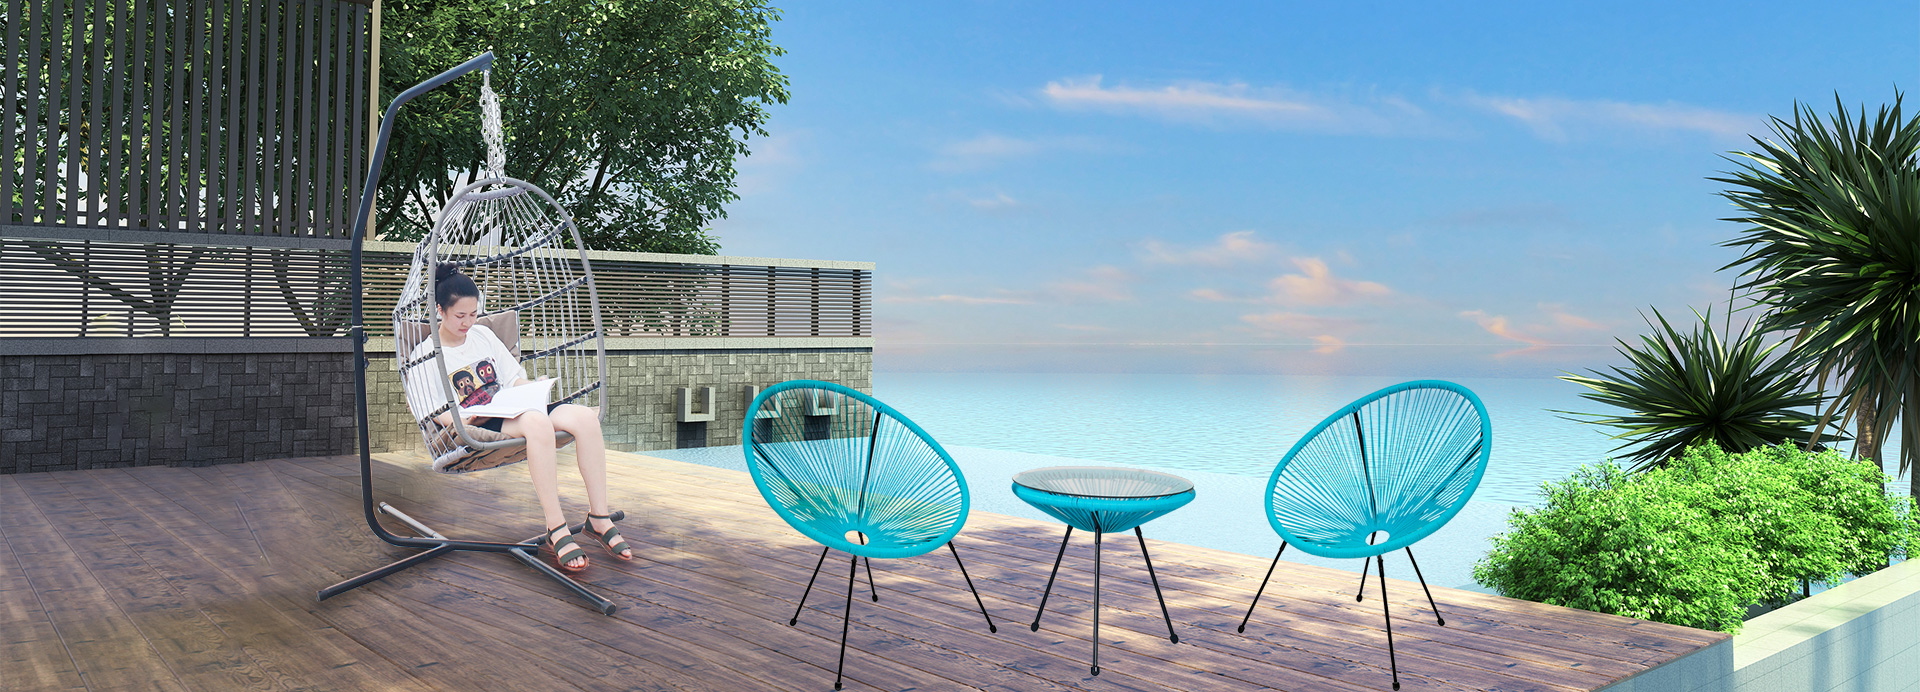 Wuyi Husen-Husen-Husen Leisure Products-Husen Company was established in 2006. It is a professional outdoor furniture factory integrating design and production.